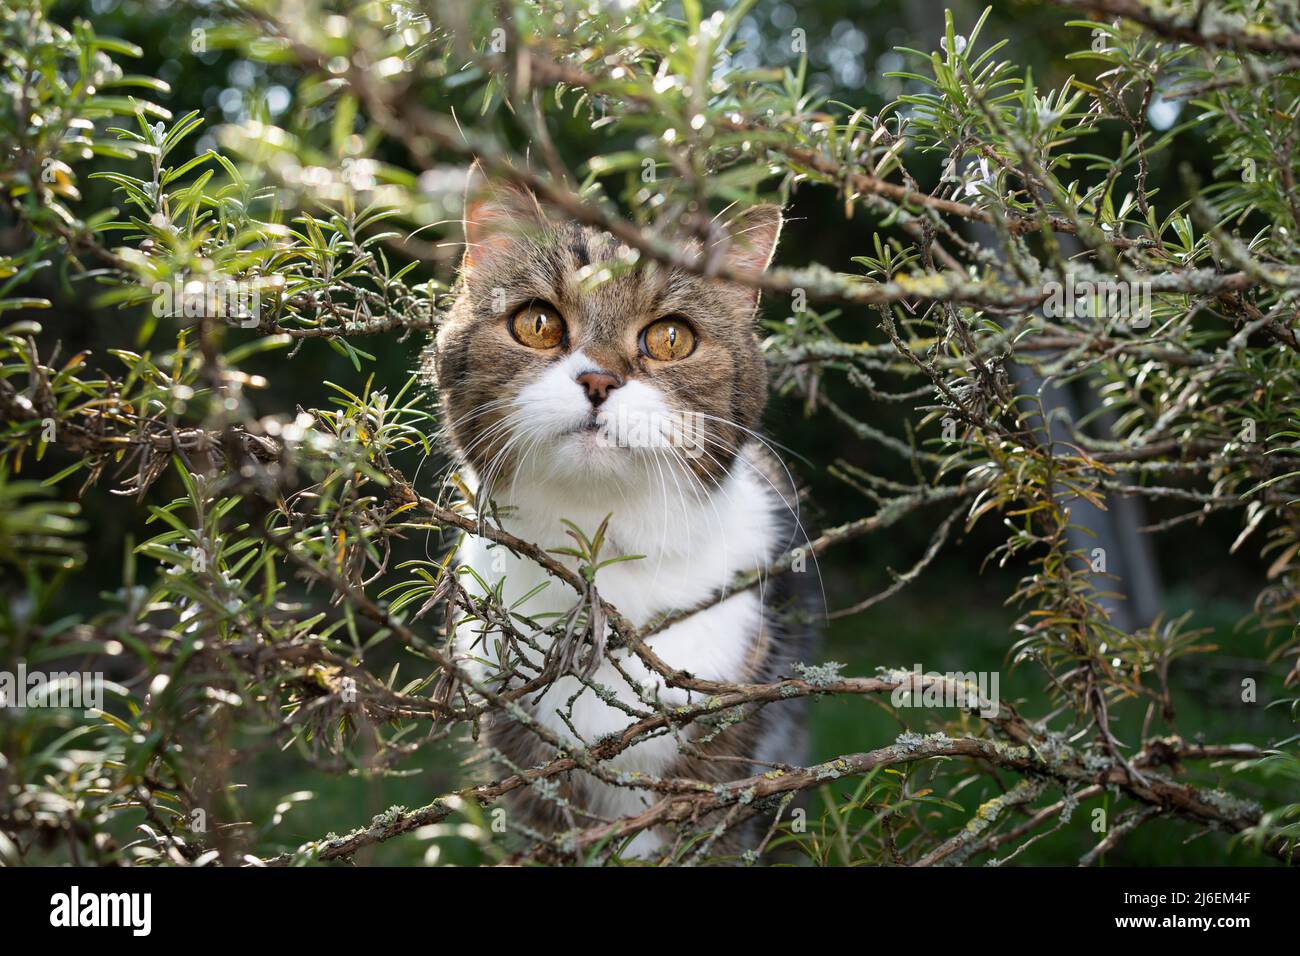 cute cat standing in rosemary bush outdoors Stock Photo